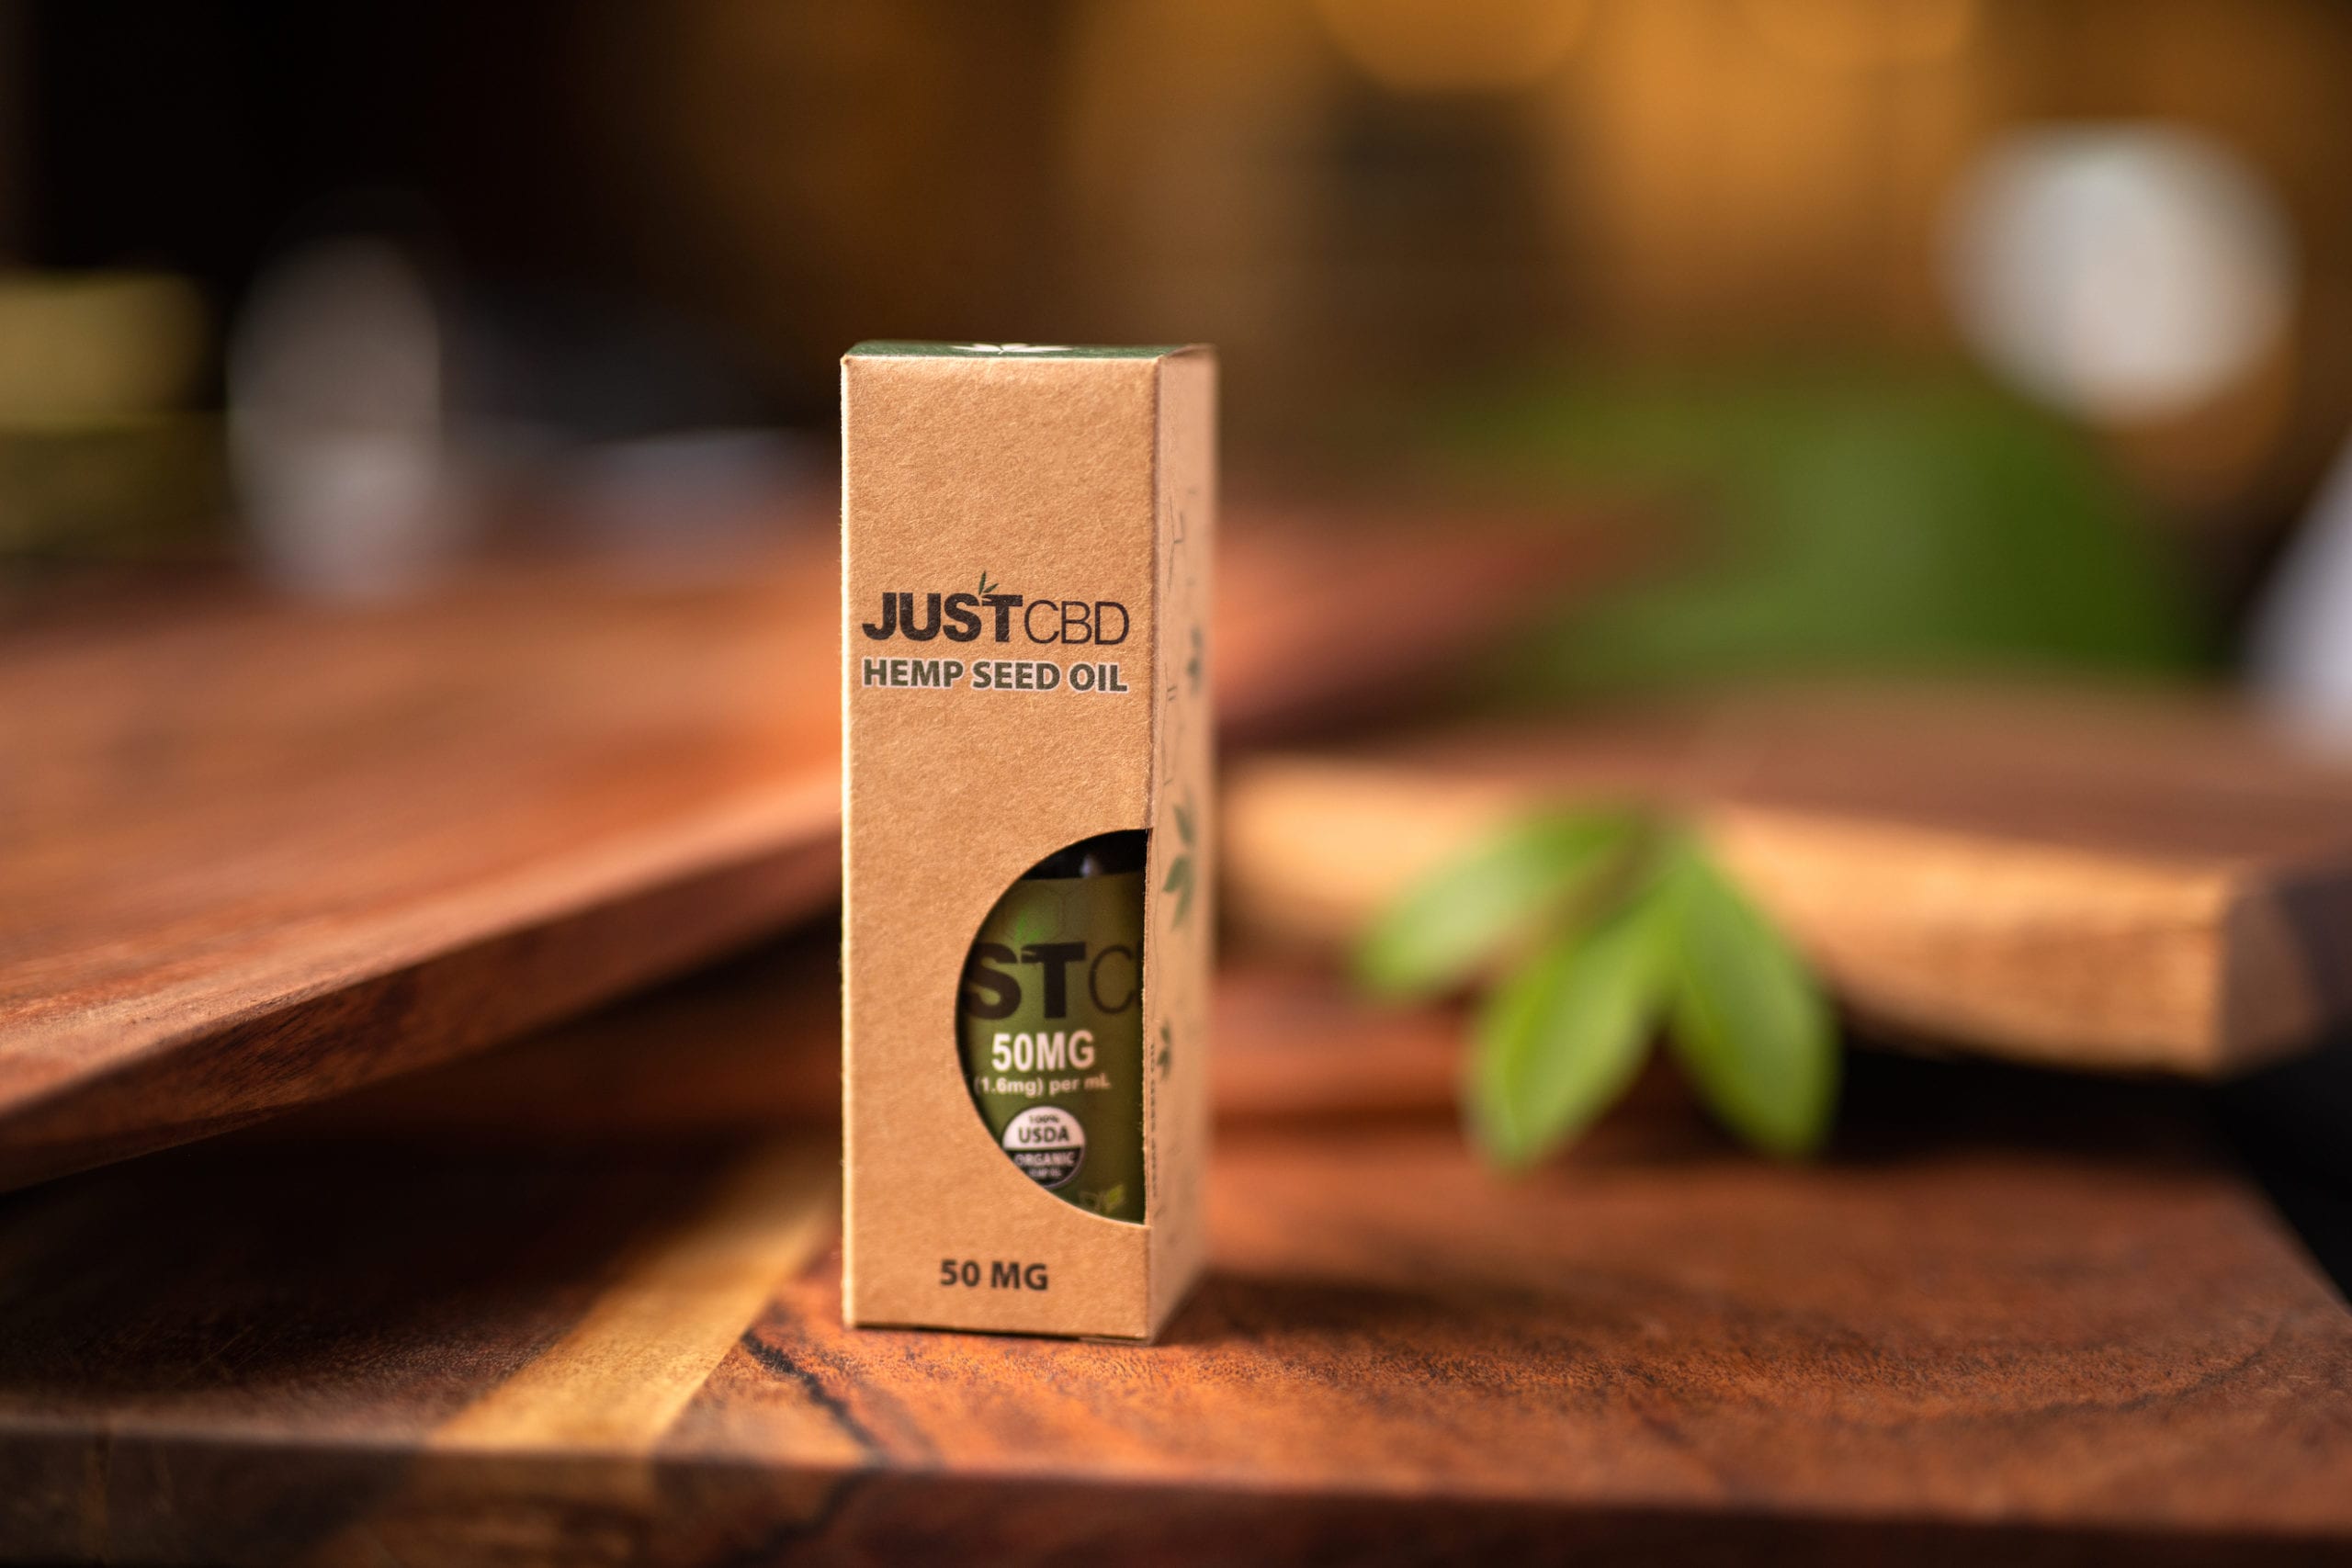 IU C&I Studios Portfolio and Page JustCBD Product Photography and JustCBD Products JustCBD Hemp Seed Oil container on display on a wooden table